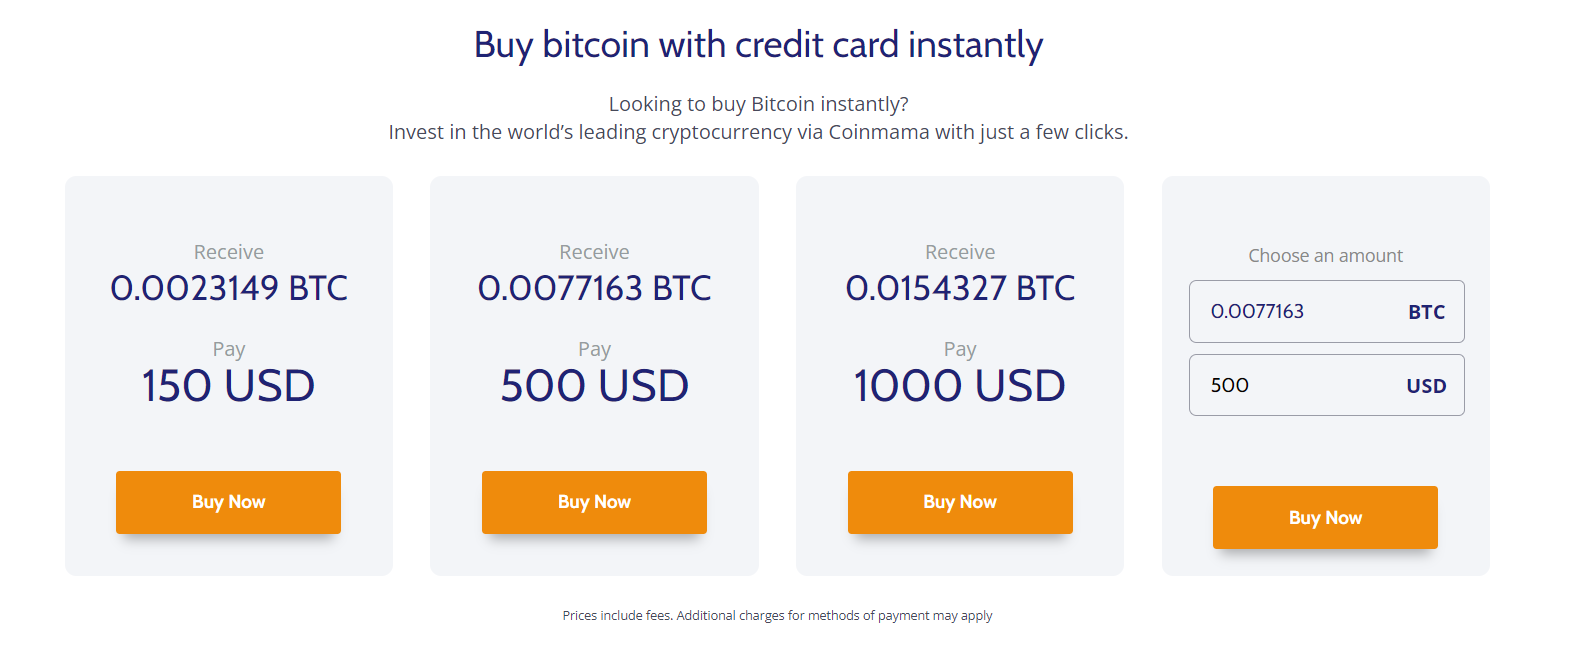 buy bitcoin with bank account instantly